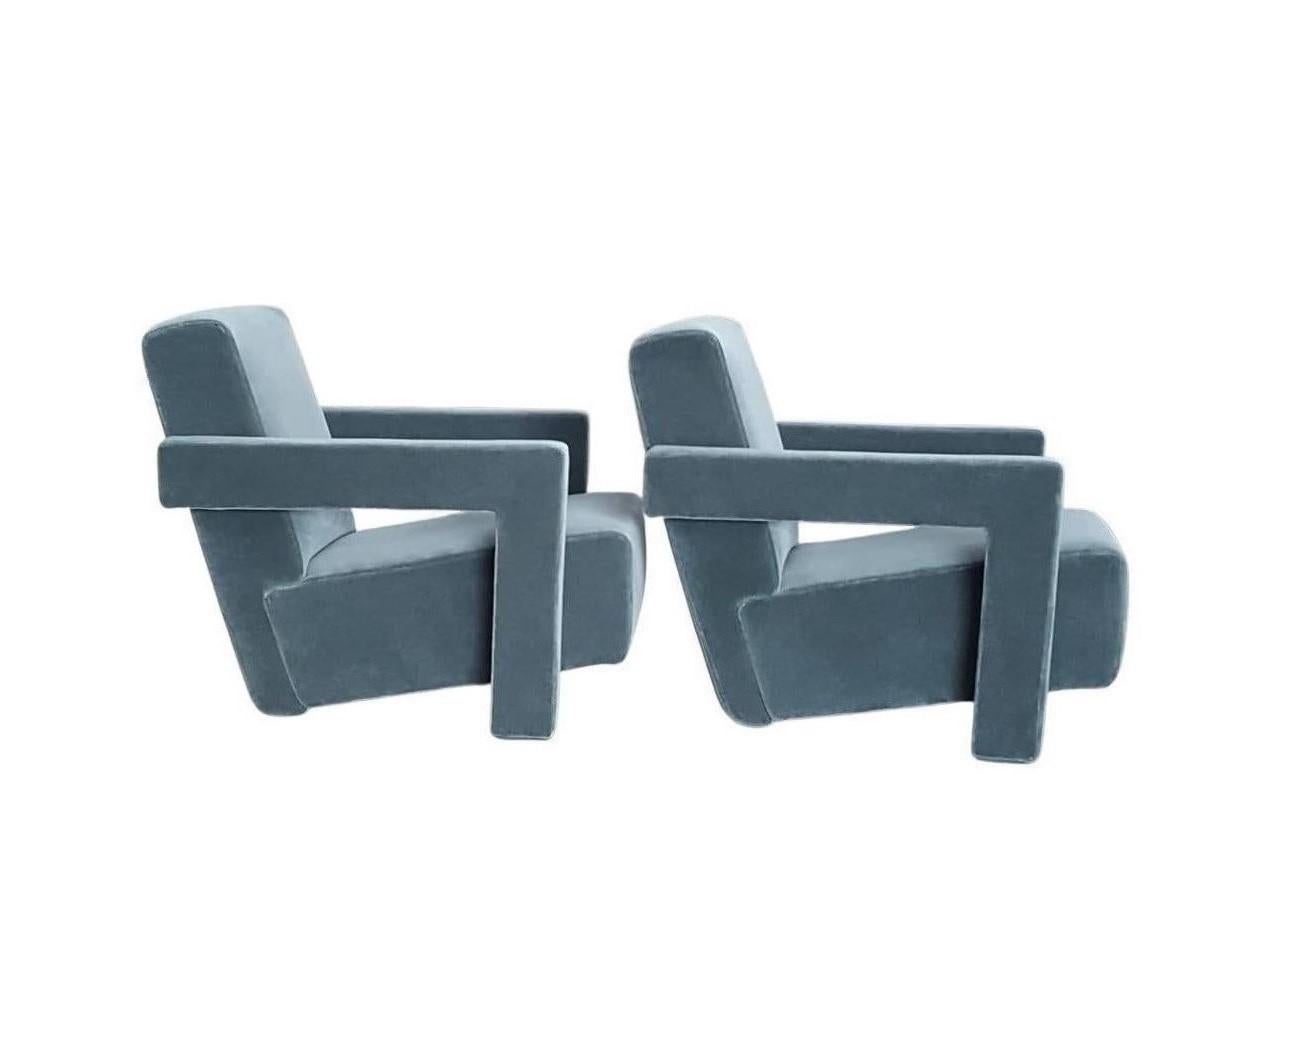 Fantastic pair of modernist lounge chairs, model 637 Utrecht by the designer Gerrit Thomas Rietveld edition Cassina from the 1990s. Each chair has armrests that merge into the front legs. The seat and the backrest come together at an angle to form